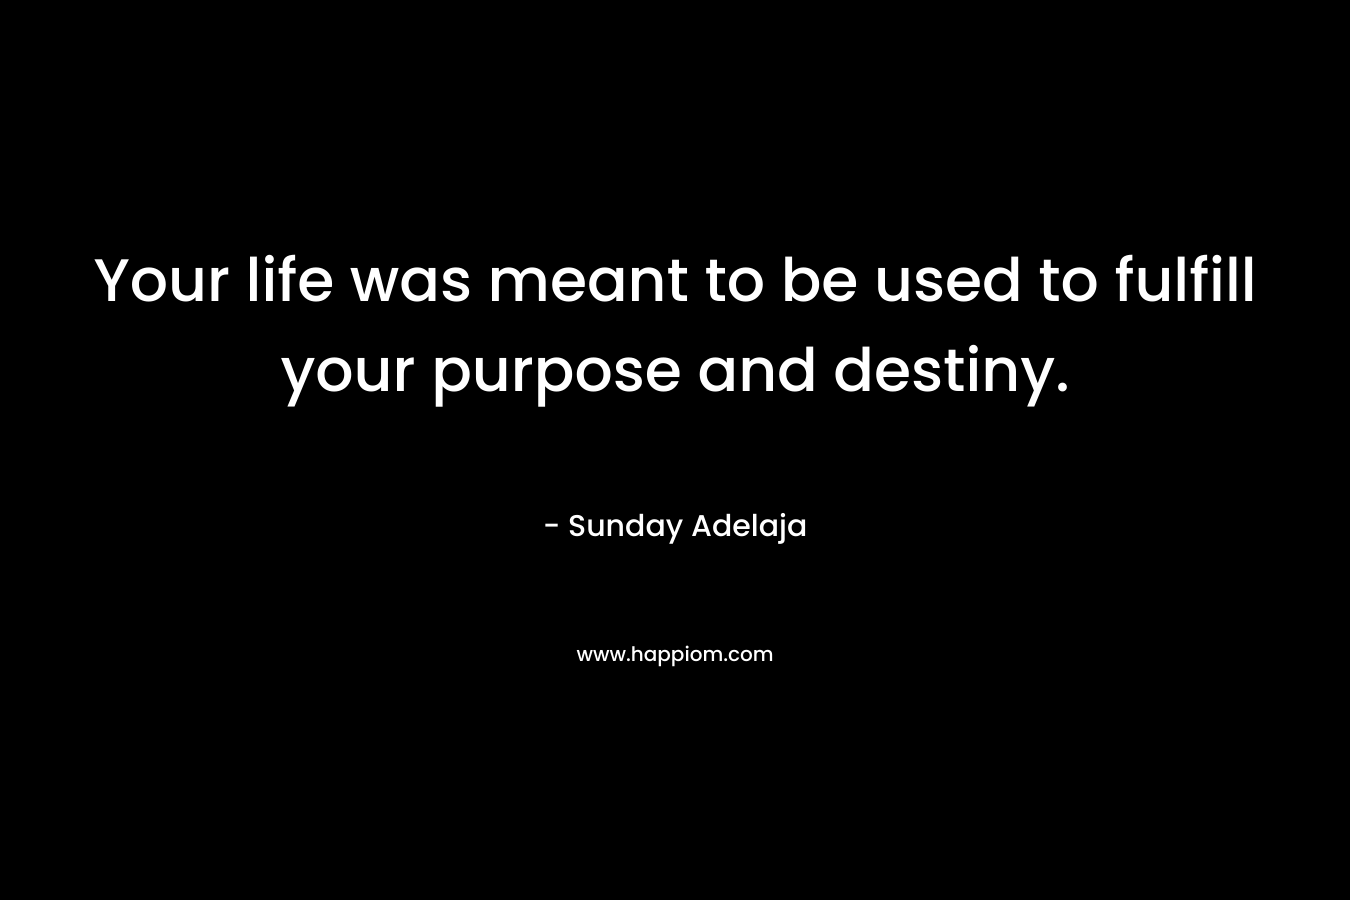 Your life was meant to be used to fulfill your purpose and destiny.